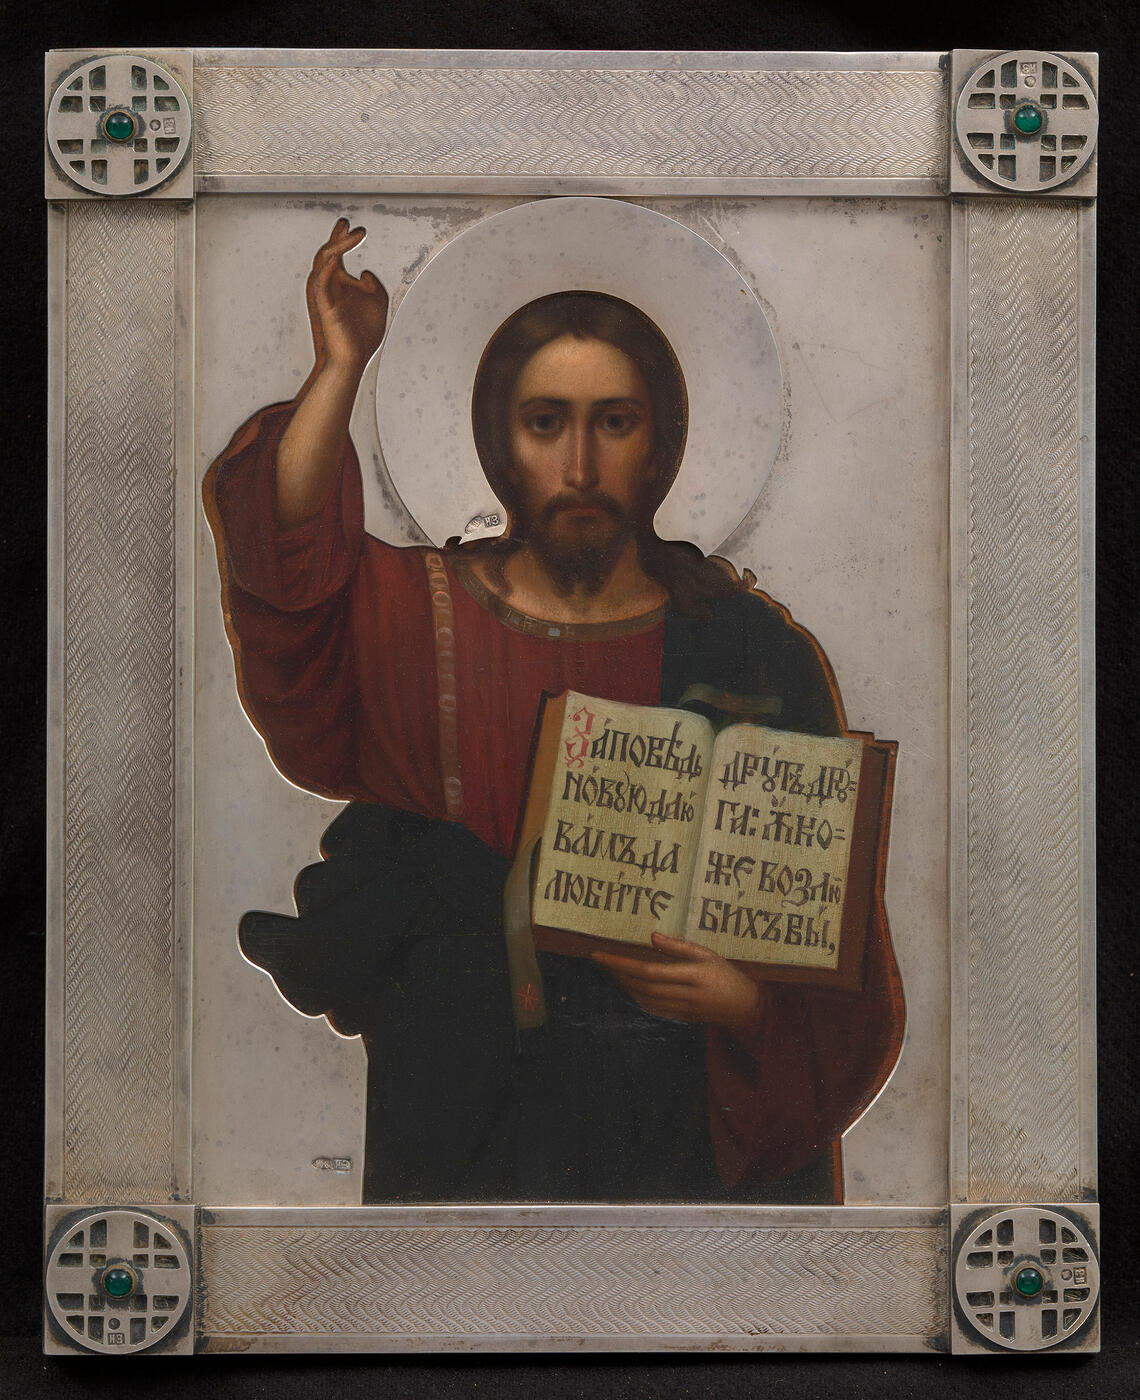 EARLY 20TH CENTURY, OIL ON PANEL, OKLAD STAMPED WITH MAKER'S MARK OF NIKOLAI ZVEREV IN CYRILLIC, MOSCOW, 1908-1917, 84 STANDARD.